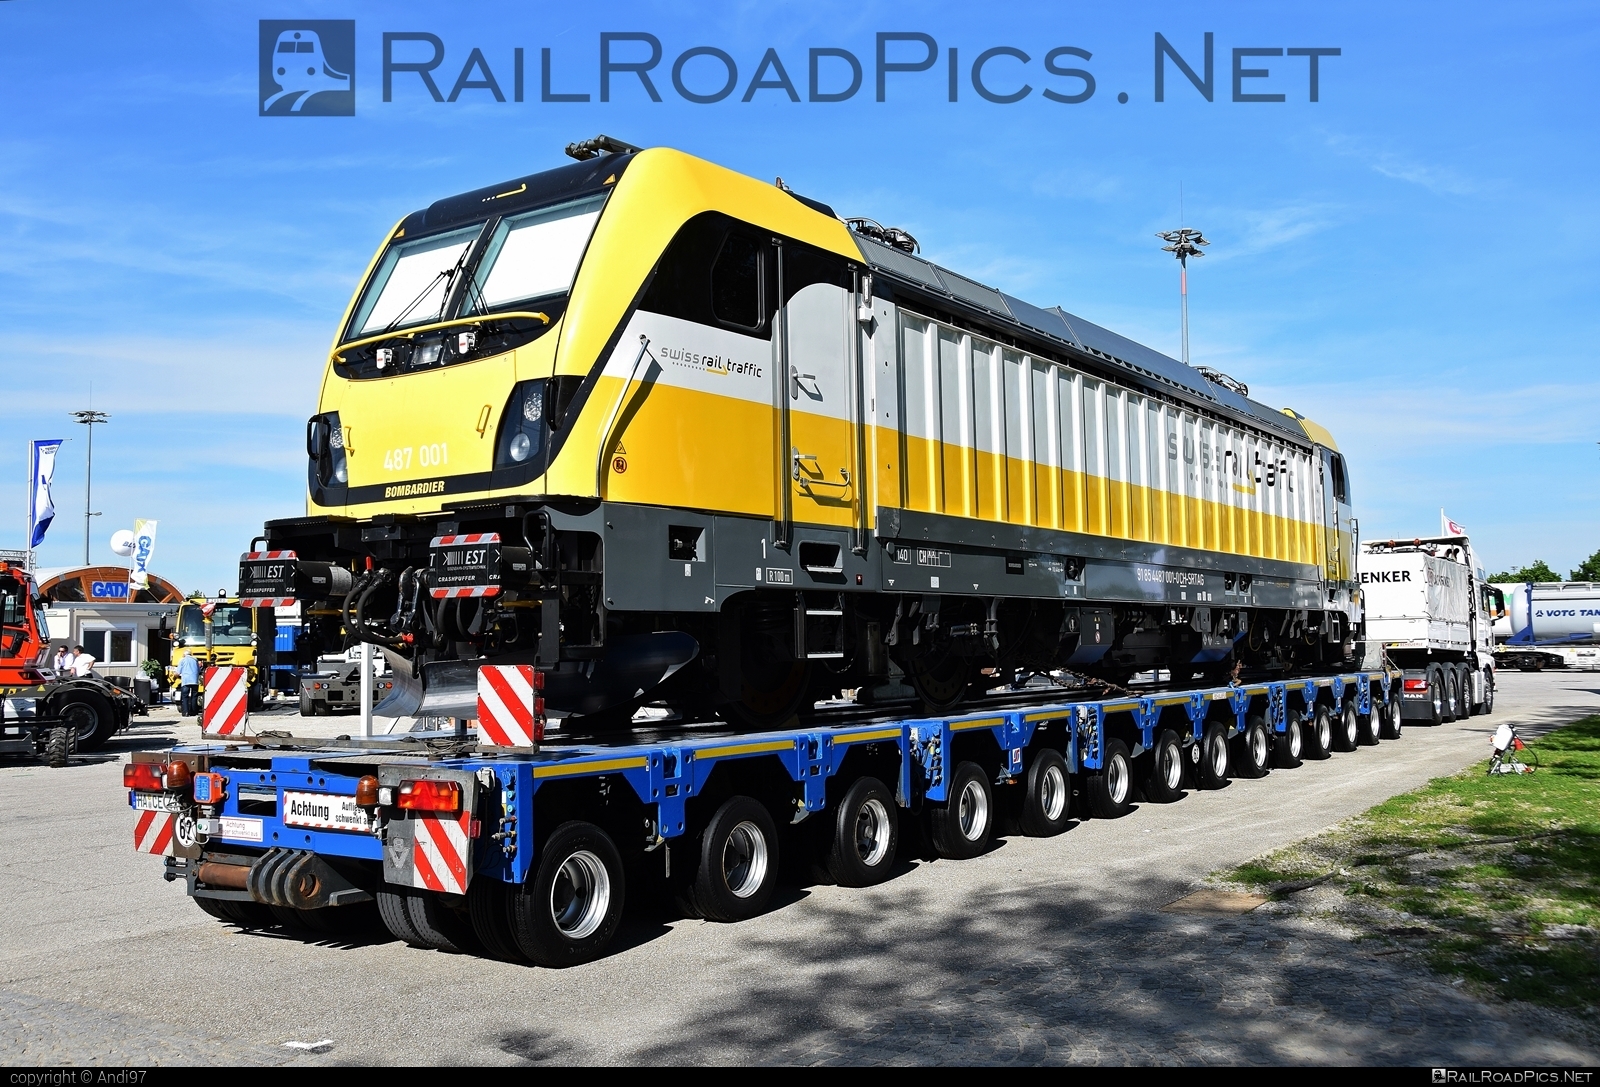 Bombardier TRAXX P160 AC3 - 487 001 operated by Swiss Rail Traffic AG #bombardier #bombardiertraxx #srtag #swissrailtraffic #traxx #traxxp160 #traxxp160ac #traxxp160ac3